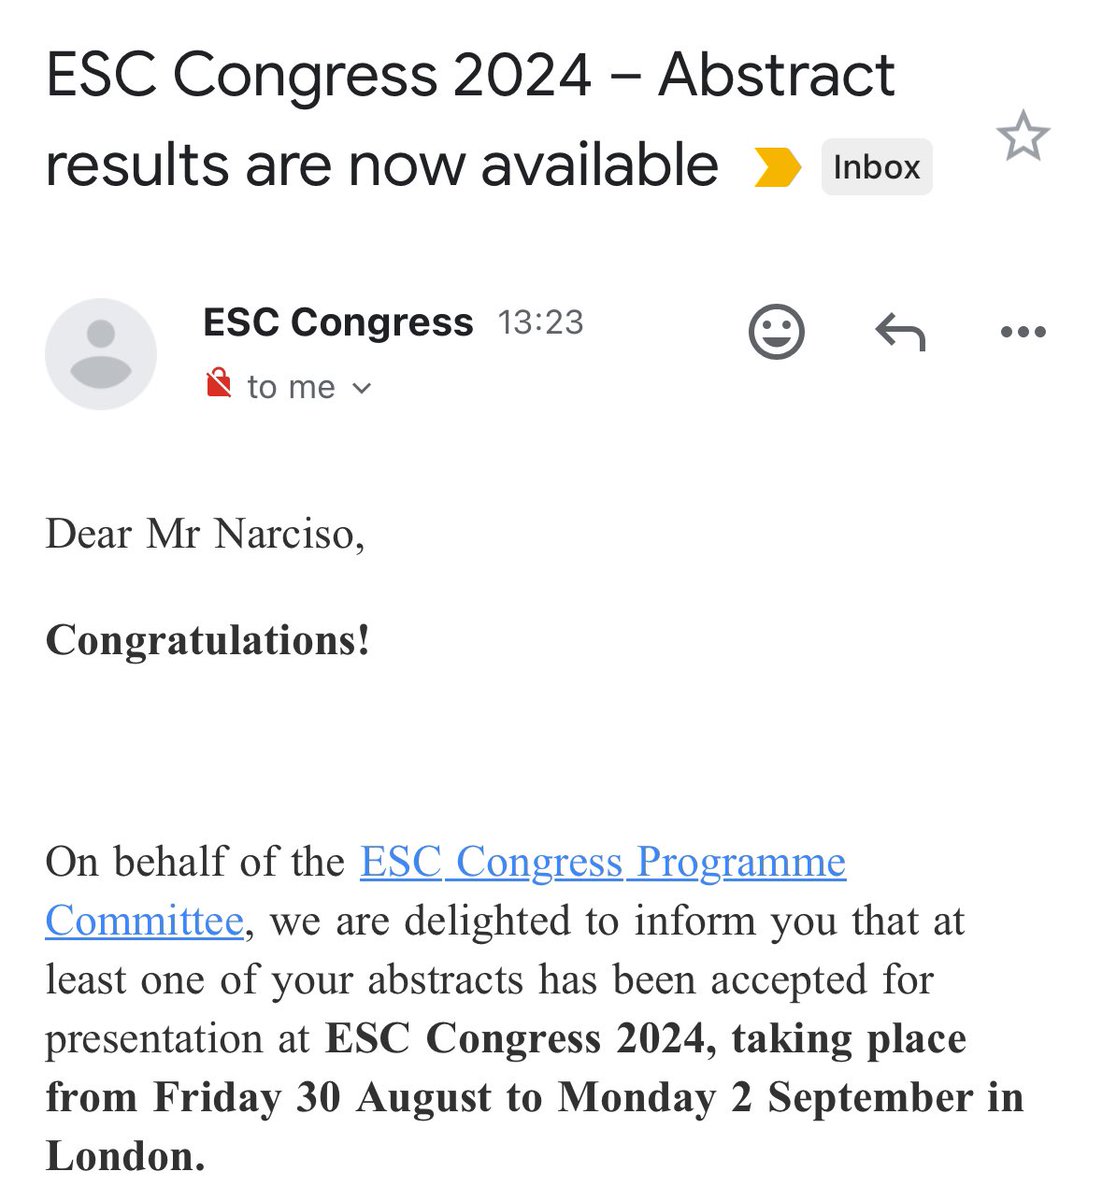 Now, it’s time for the european society of cardiology congress 2024 in London 
#medicine #medtwitter #ESC2024 #metaanalysis #systematicreview #researcher